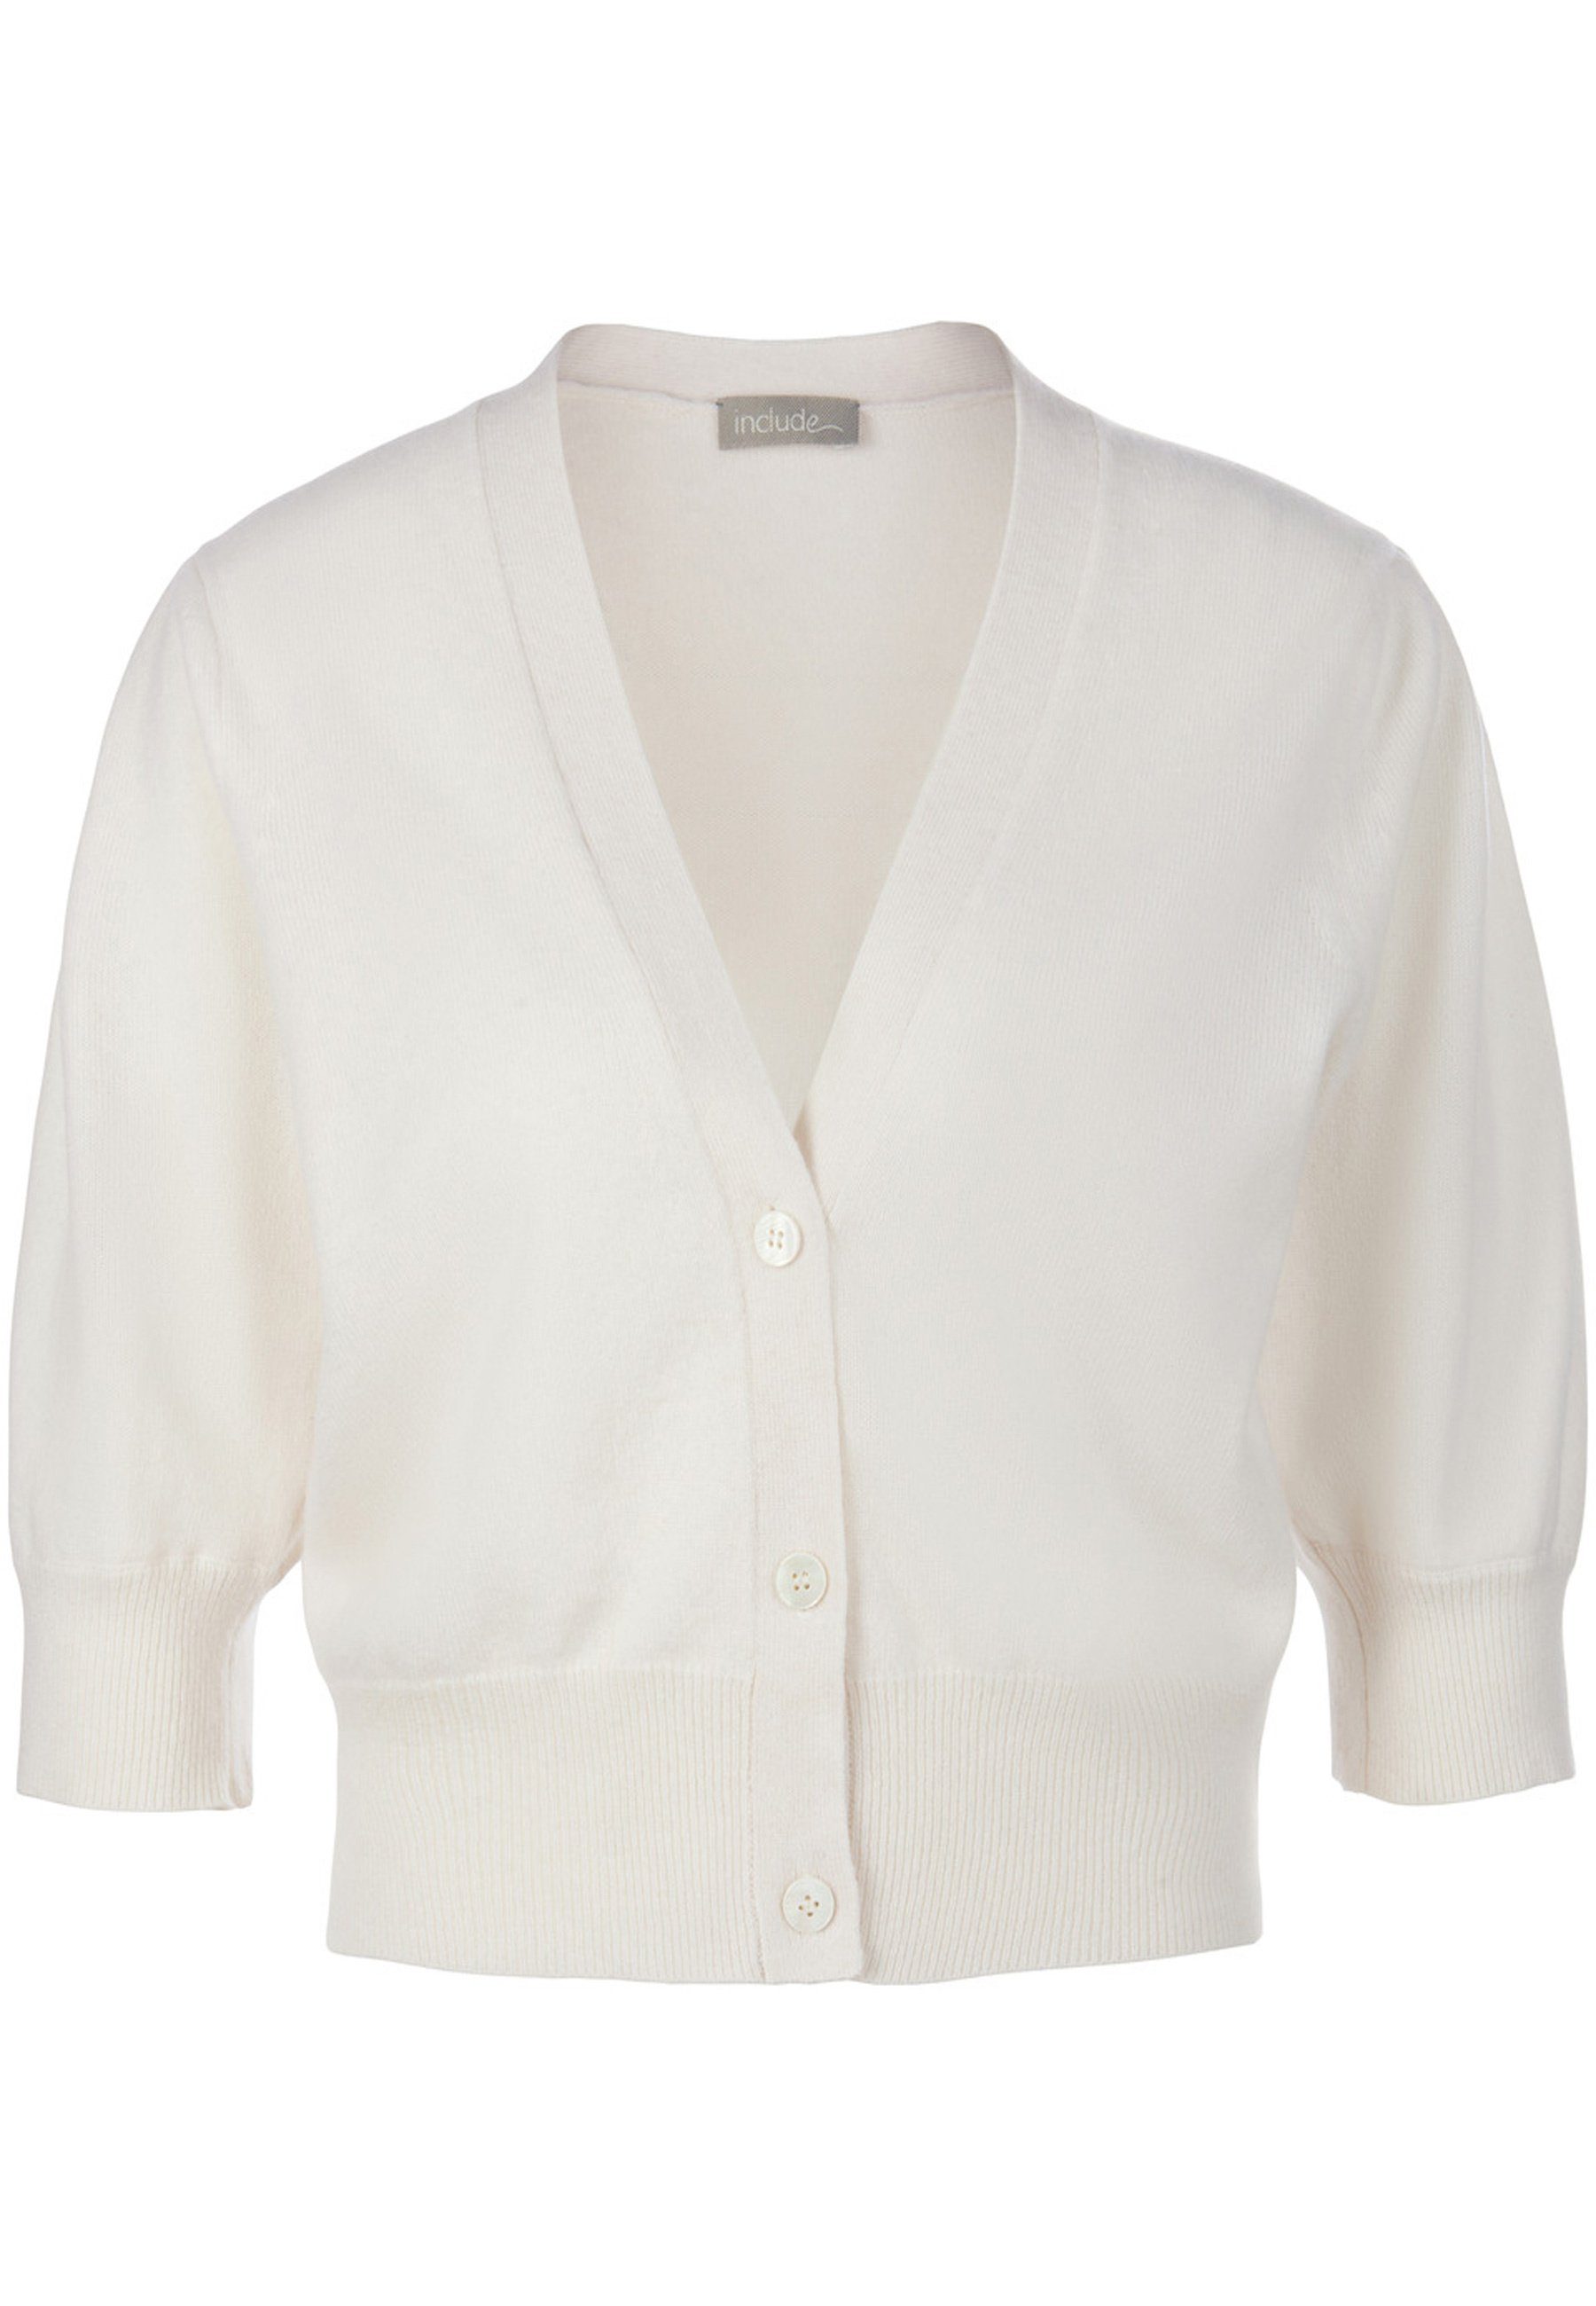 Cashmere wollweiss Cardigan include